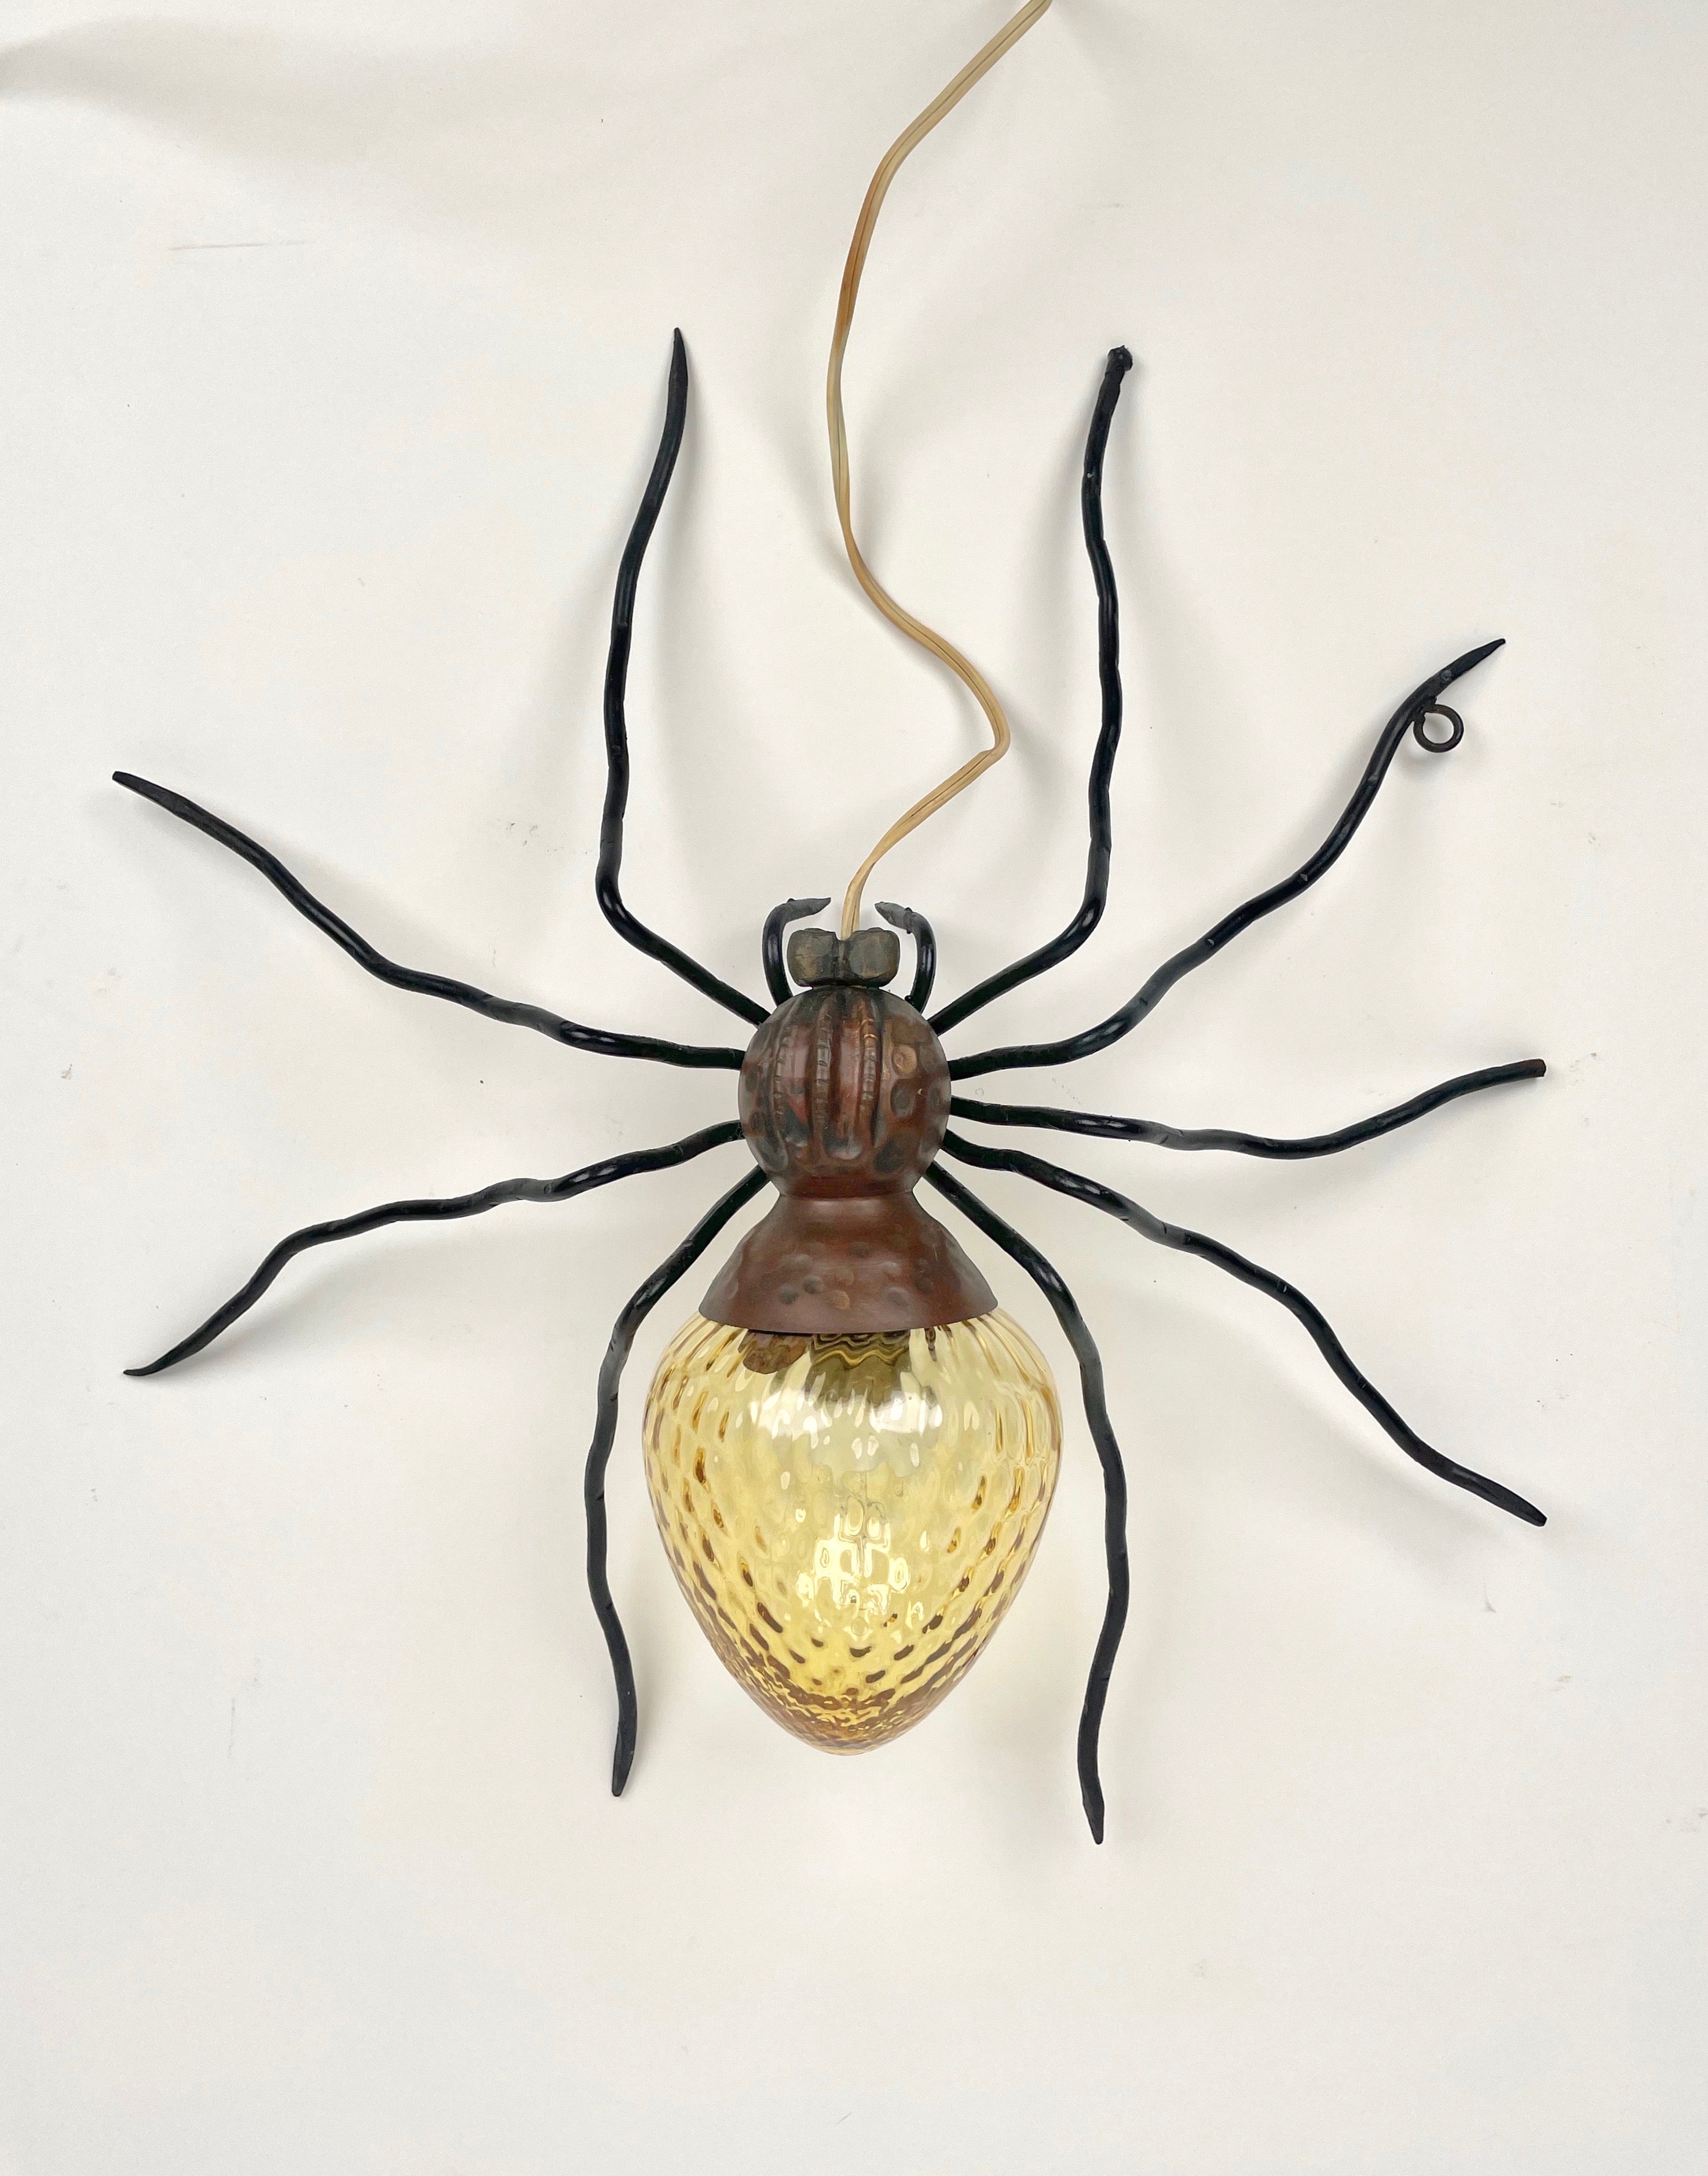 Spider wall lamp sconce in copper, iron and yellow art glass made in Italy in the 1960s. 

This lamp is a typical outdoor lamp mounted over the entrance door of Italian houses of the 1960s. 

Nowadays they are requested design objects to be used